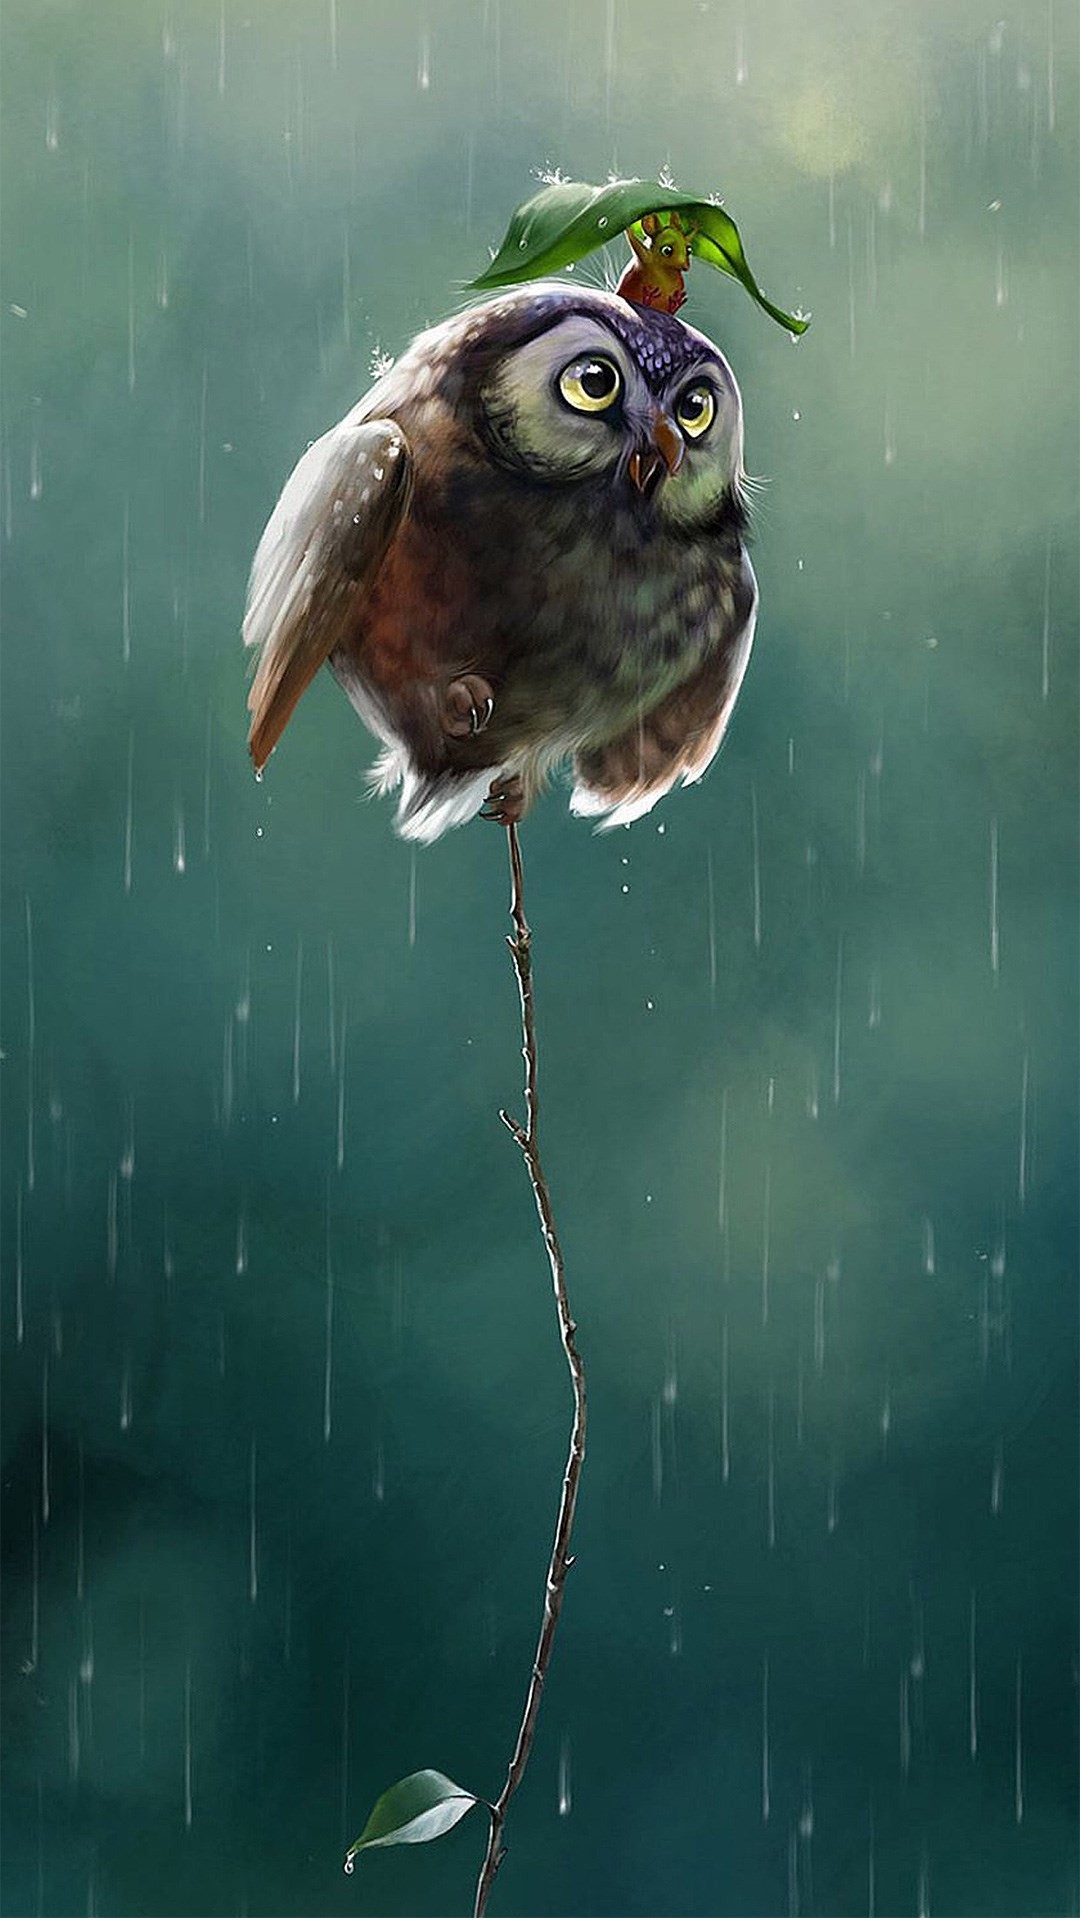 Cute Owl Flying High Rainy Day Covering Leaf iPhone 8 wallpaper